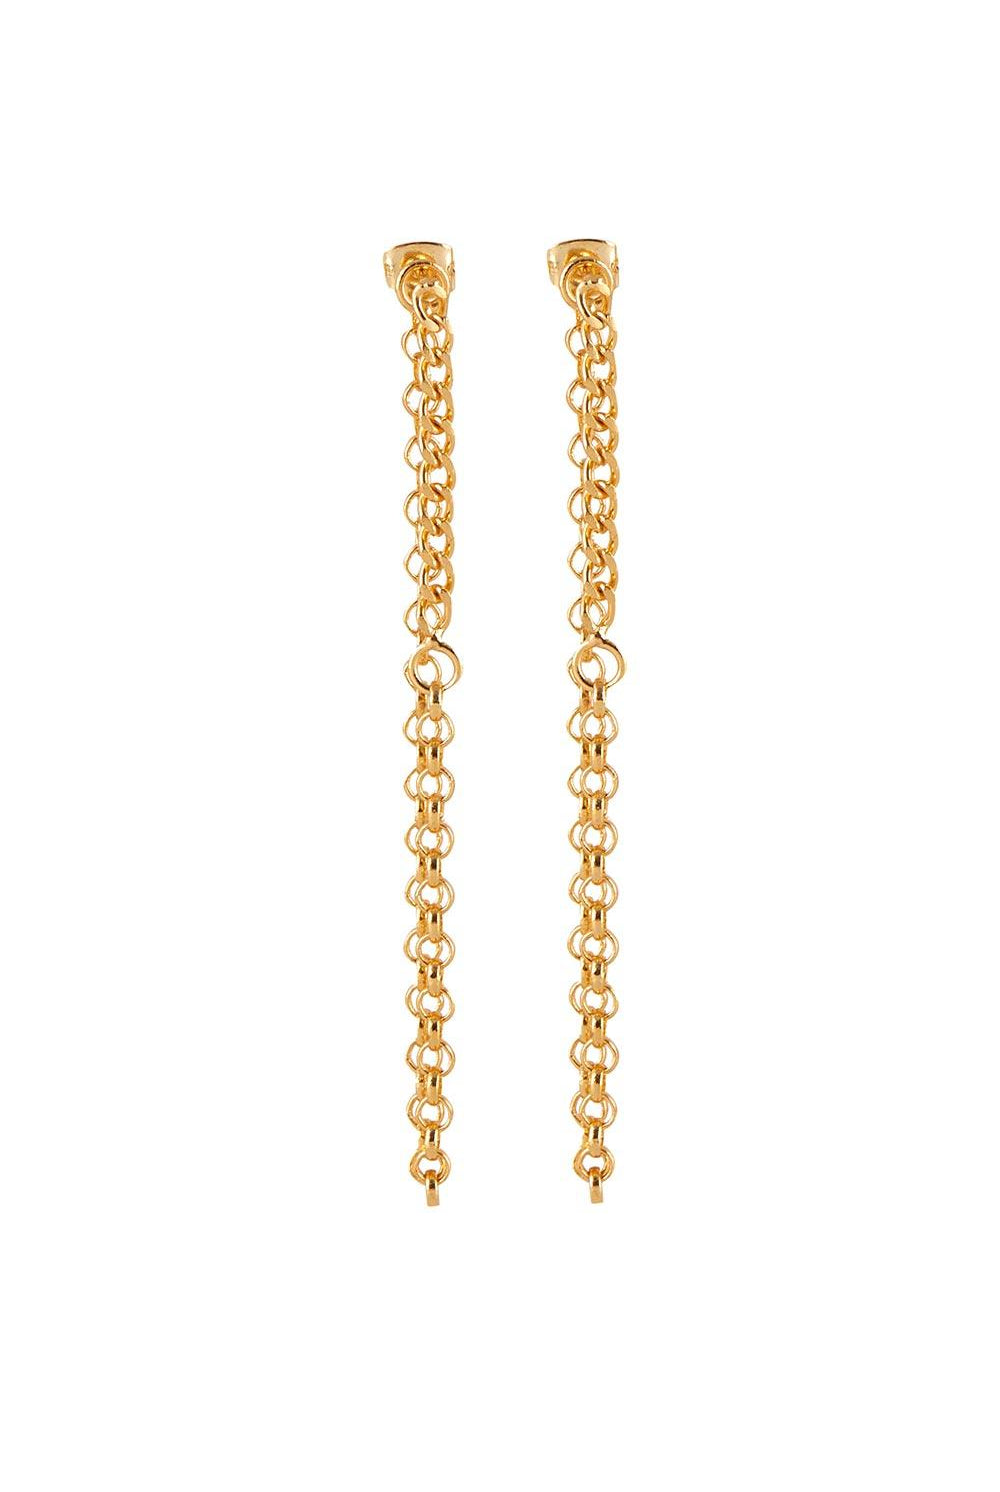 Dieci Dita | Different Chain Earring | Milagron